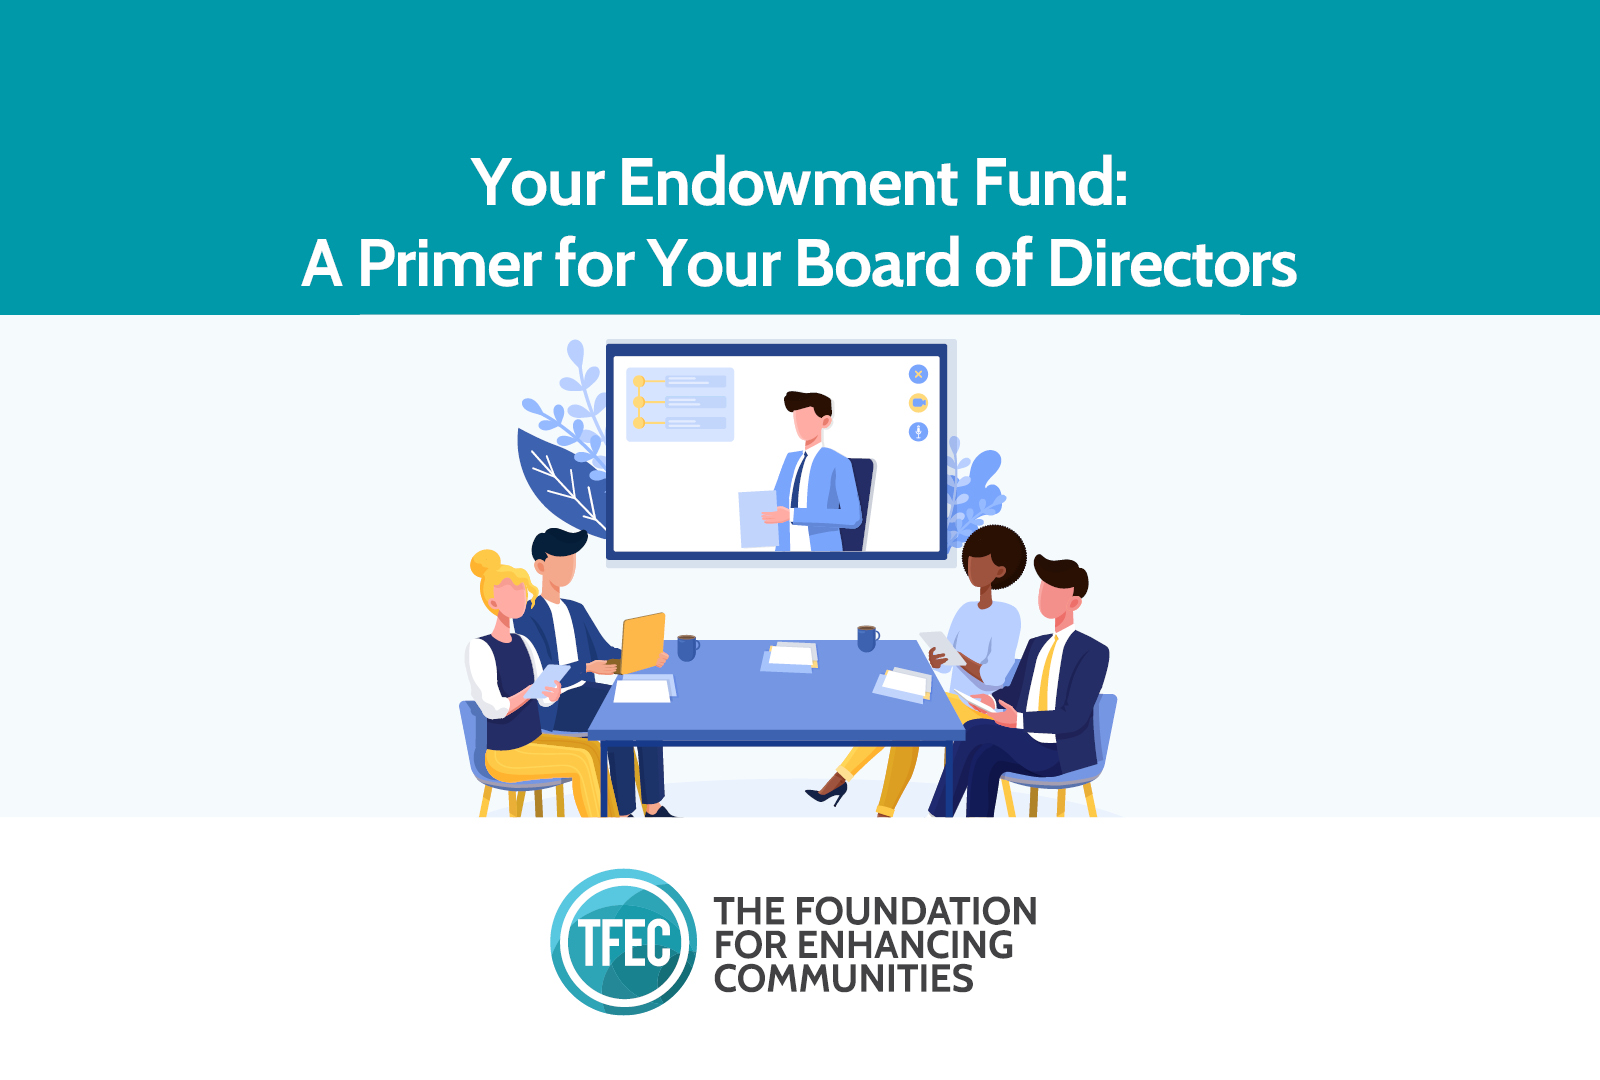 Your Endowment Fund: A Primer for Your Board of Directors